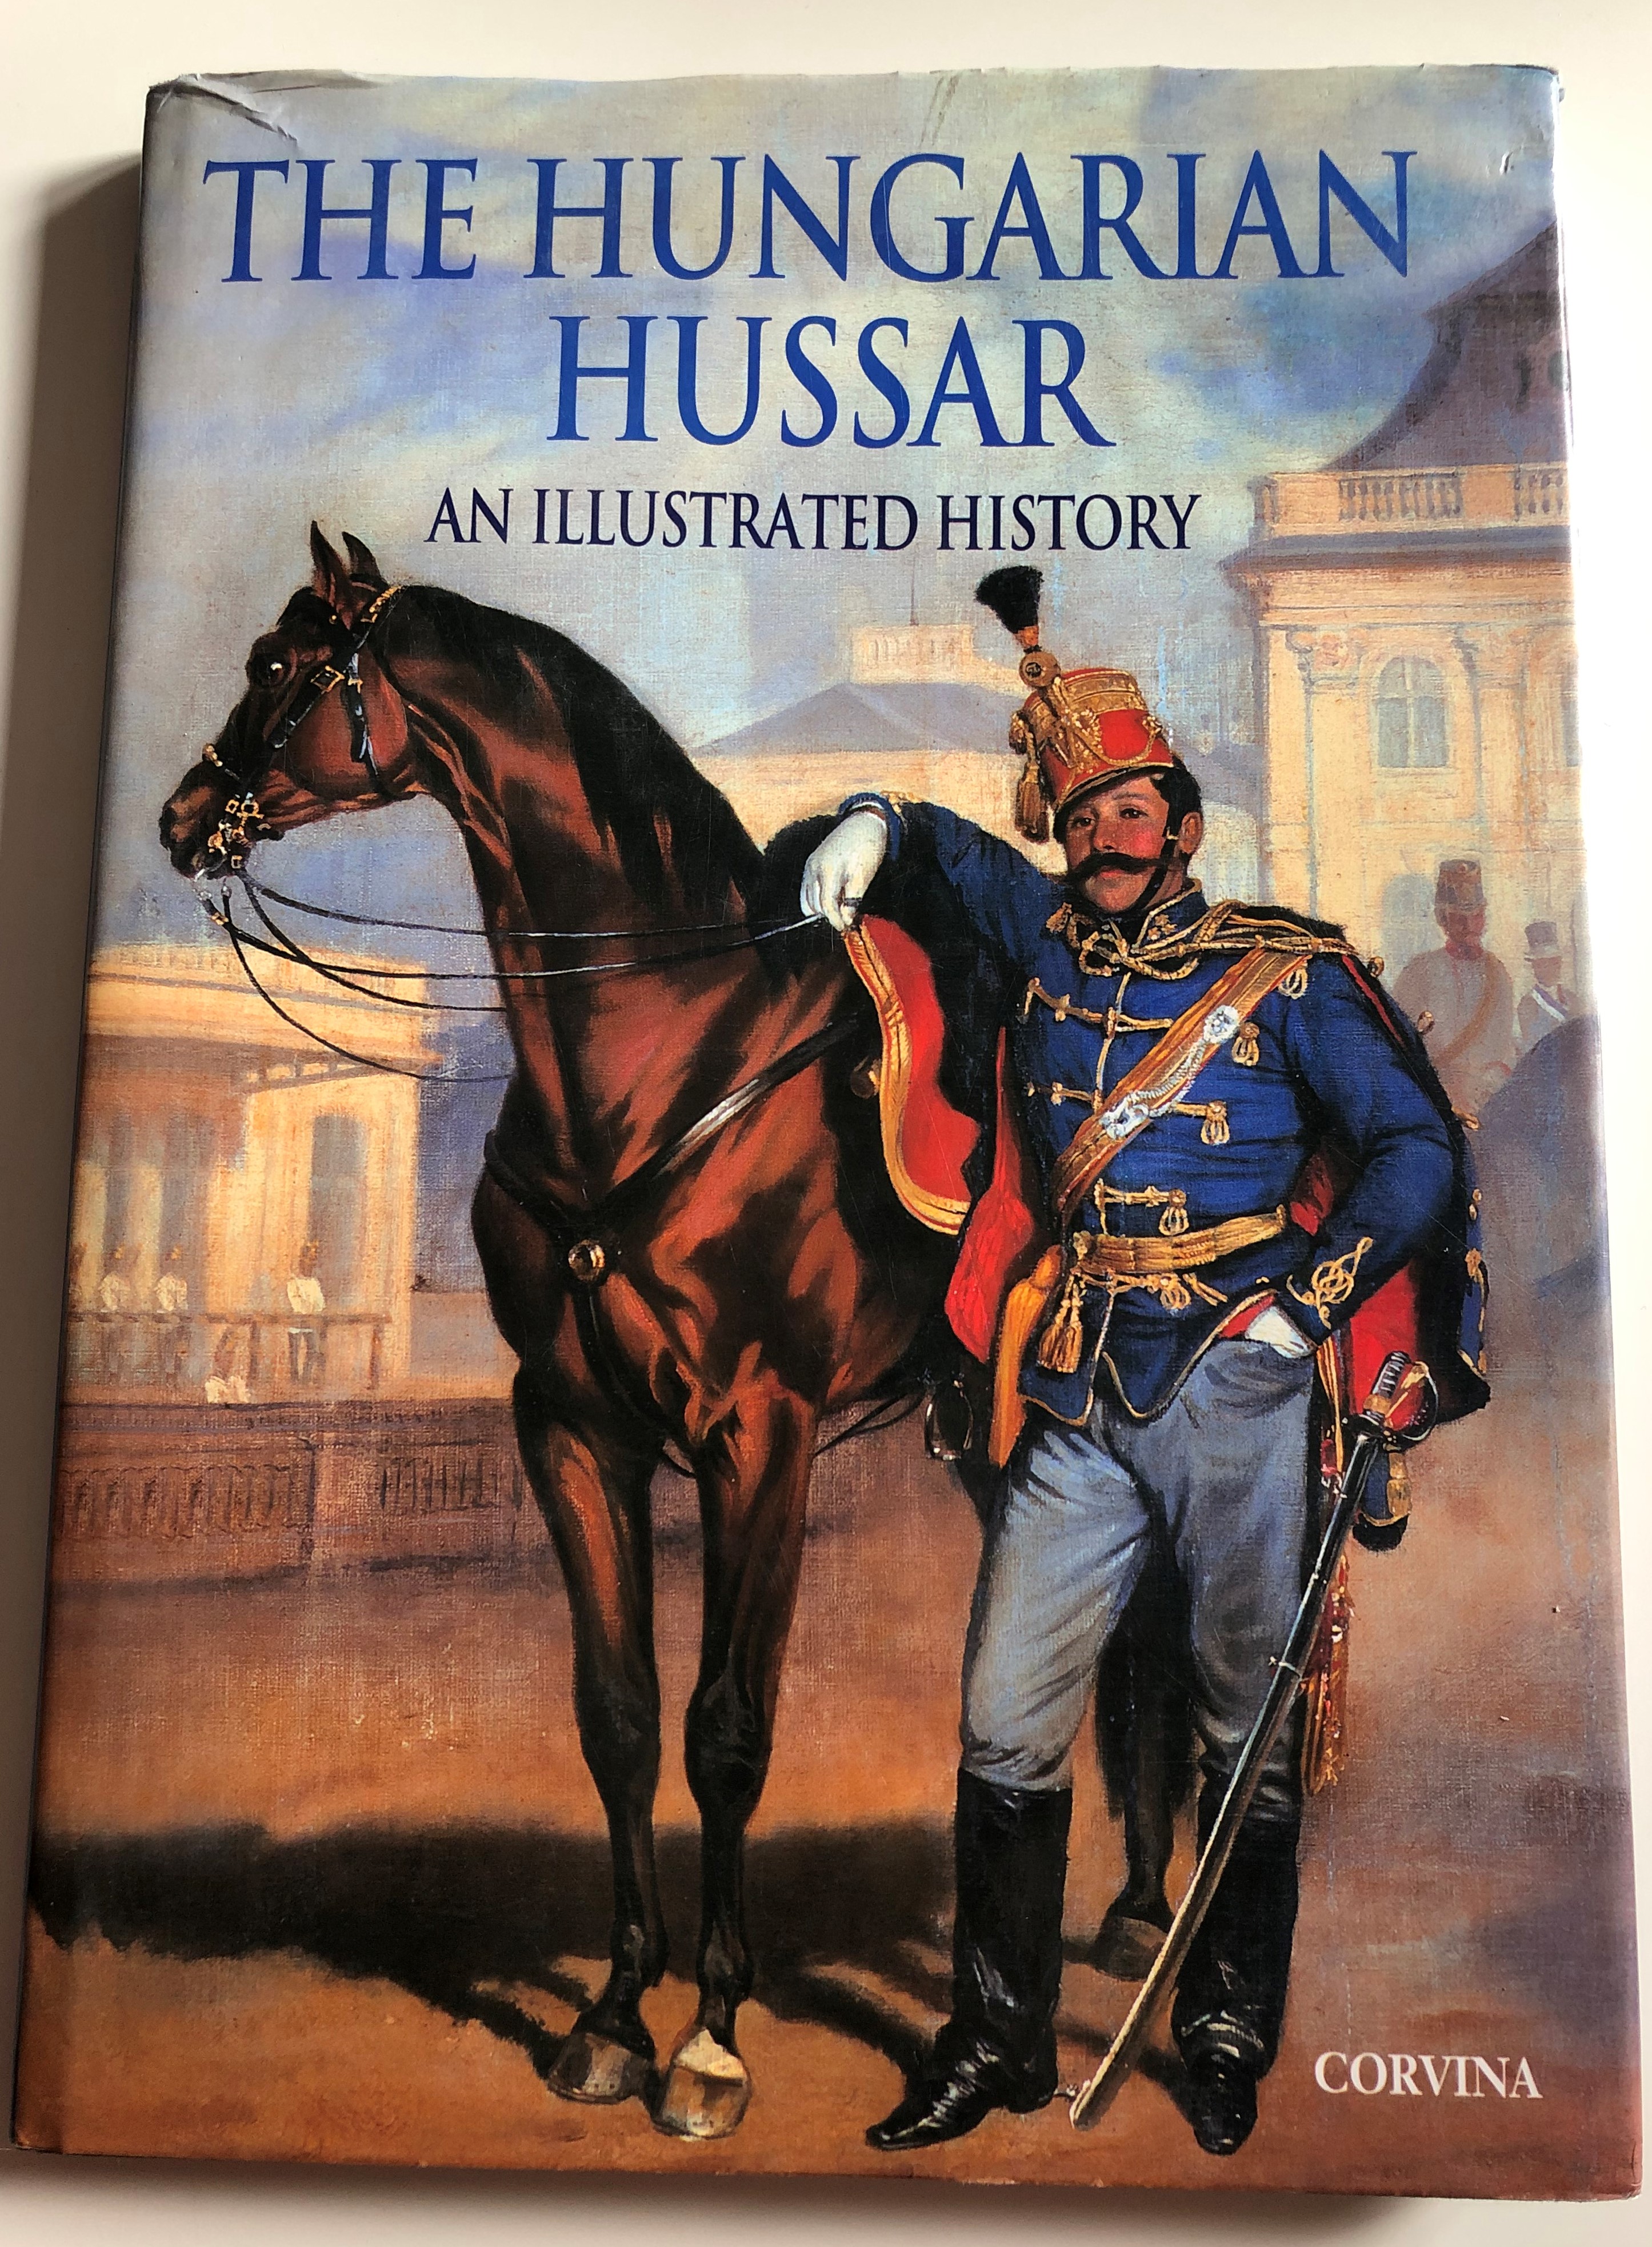 The Hungarian Hussar - An illustrated History  1.JPG